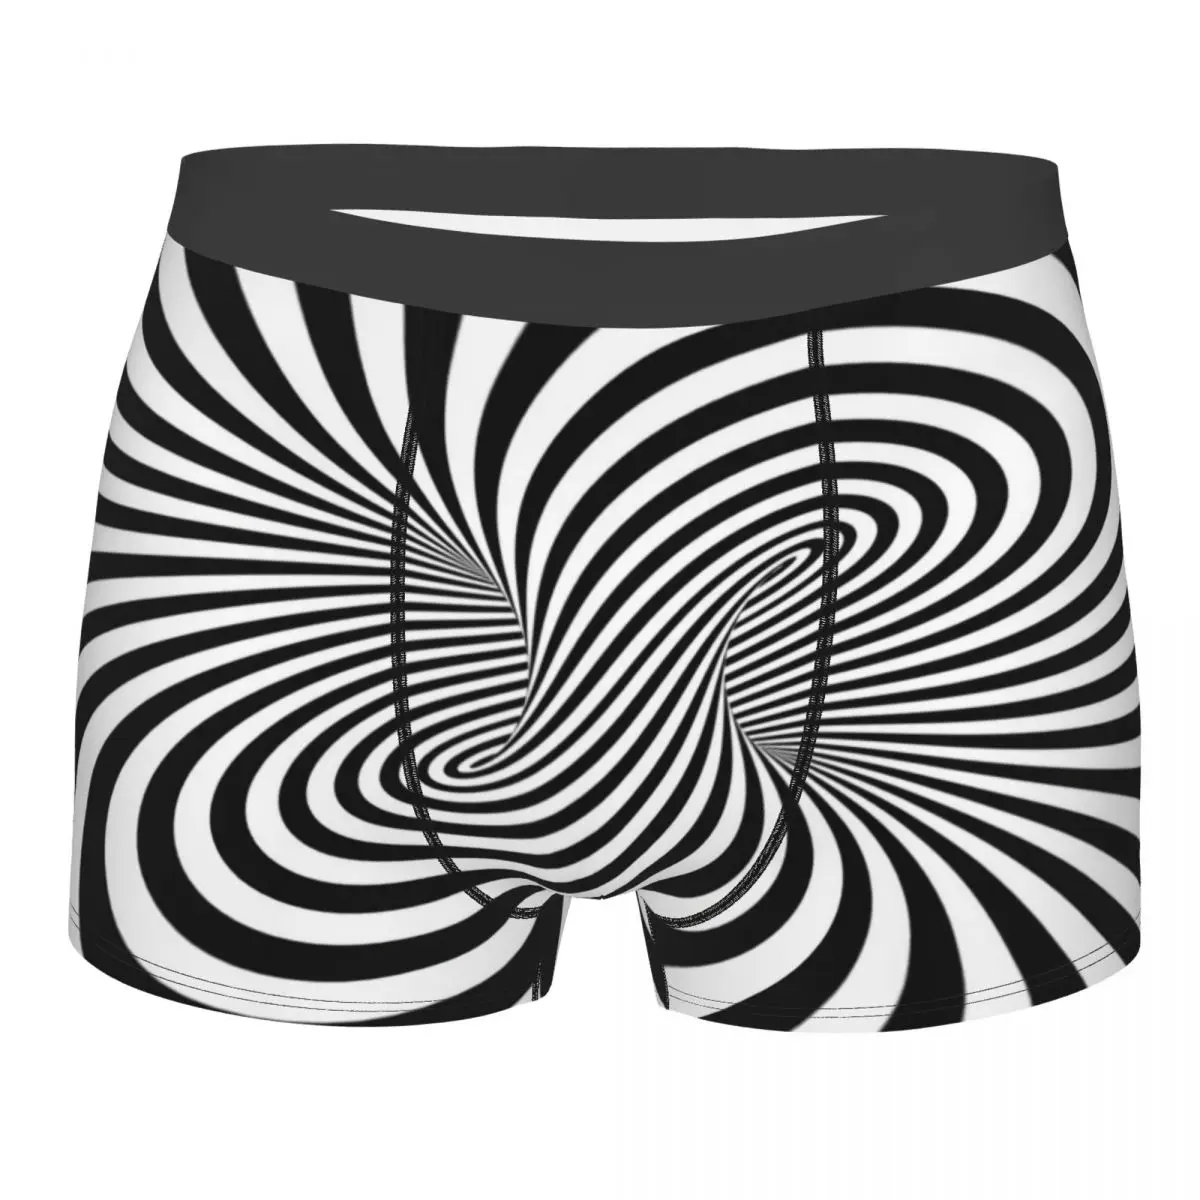 3D Stereo Vision Underpants Breathbale Panties Male Underwear Print Shorts Boxer Briefs 1 4 inch 6 35mm ts mono male to rca male audio cable for amplifier mixer speaker mic guitar hifi stereo system shielded cords